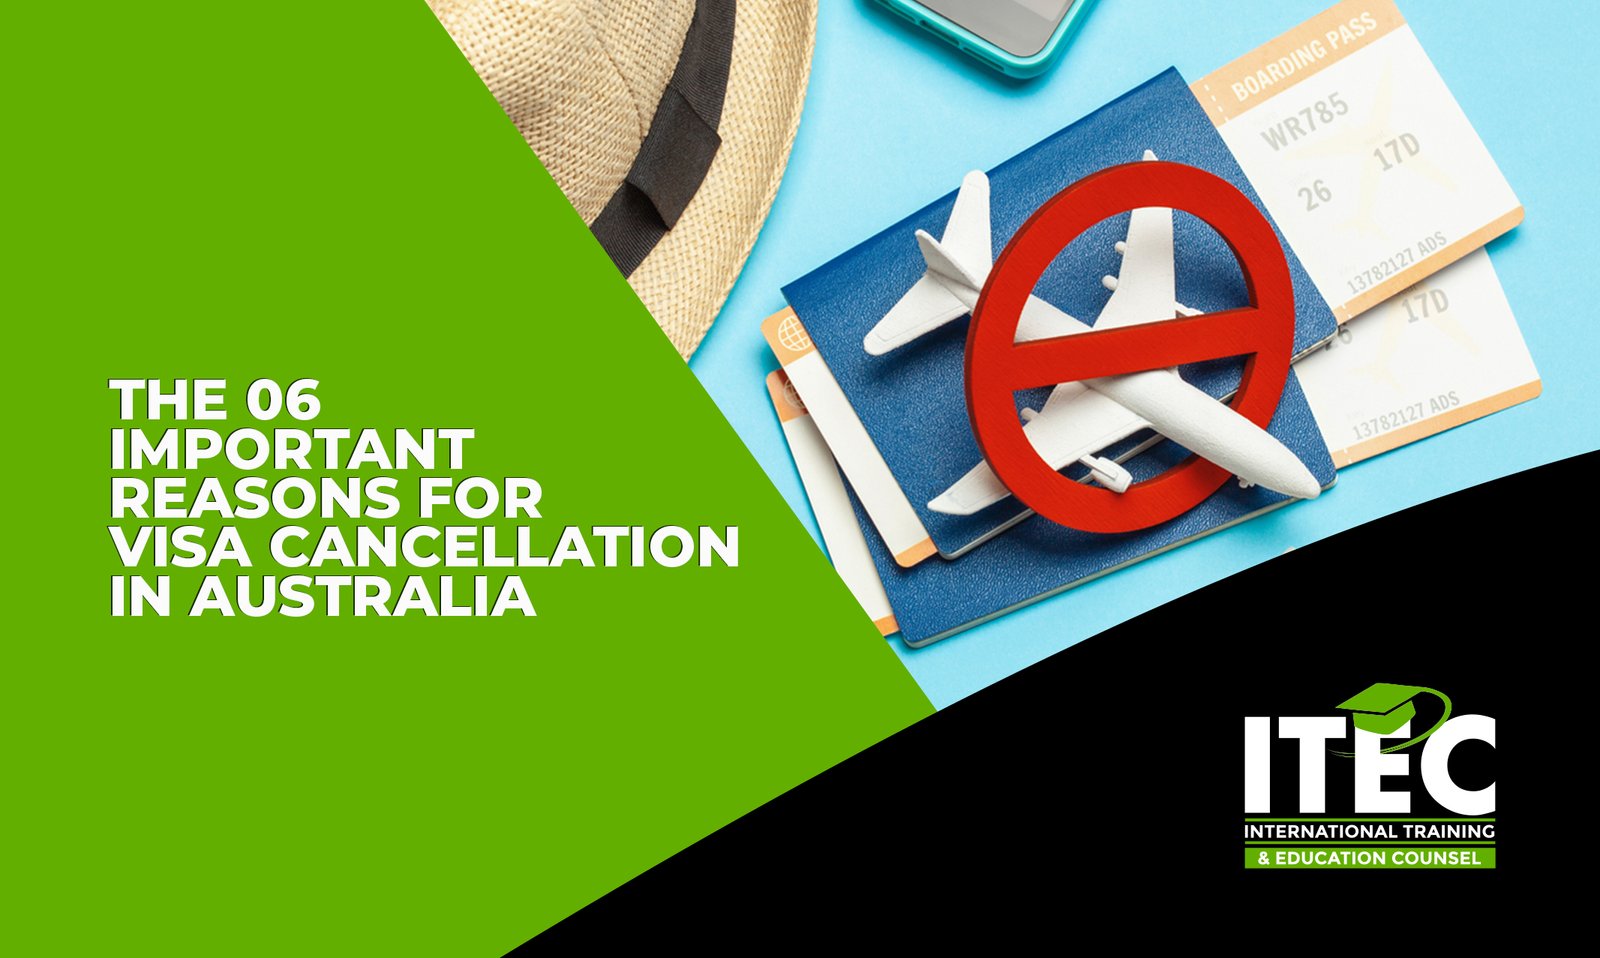 The 06 Important Reasons for Visa Cancellation in Australia 